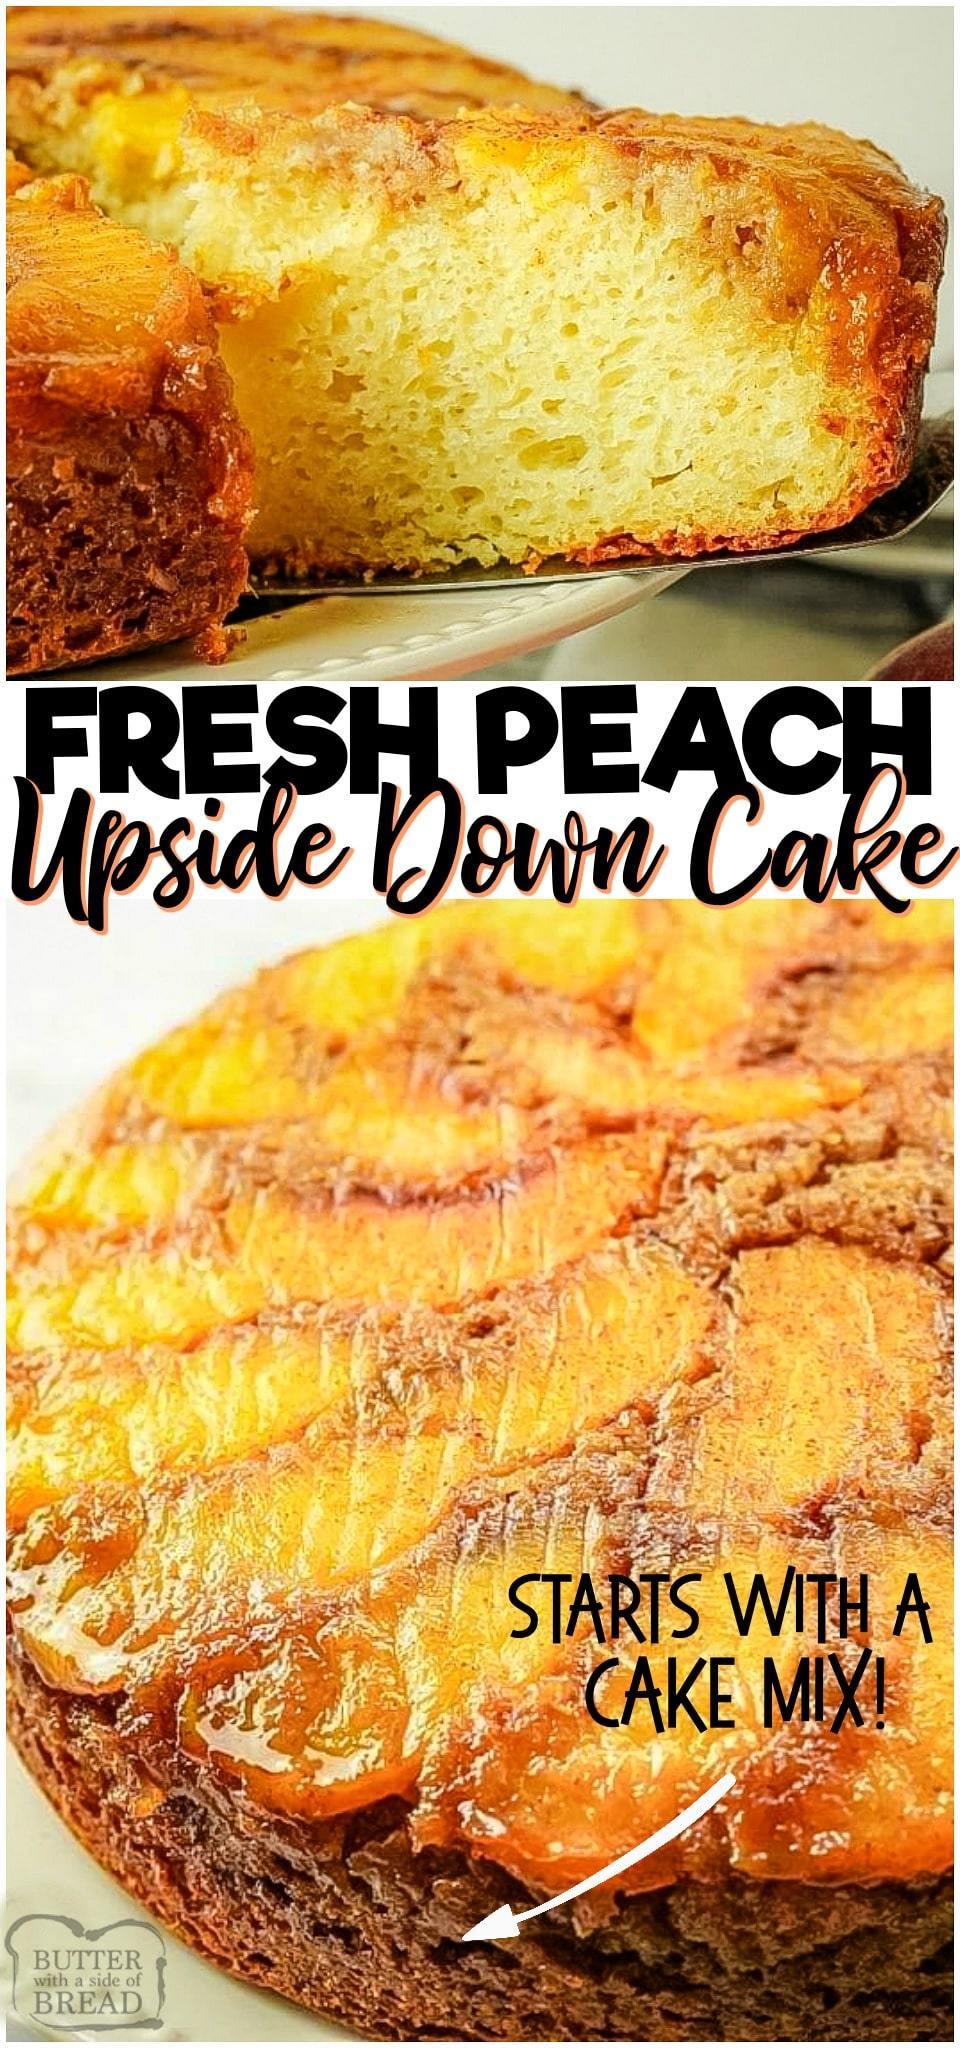 Peach Upside Down Cake is an amazing peach cake recipe with a handful of pantry ingredients + peaches!  This cake is the perfect way to enjoy fresh peaches!